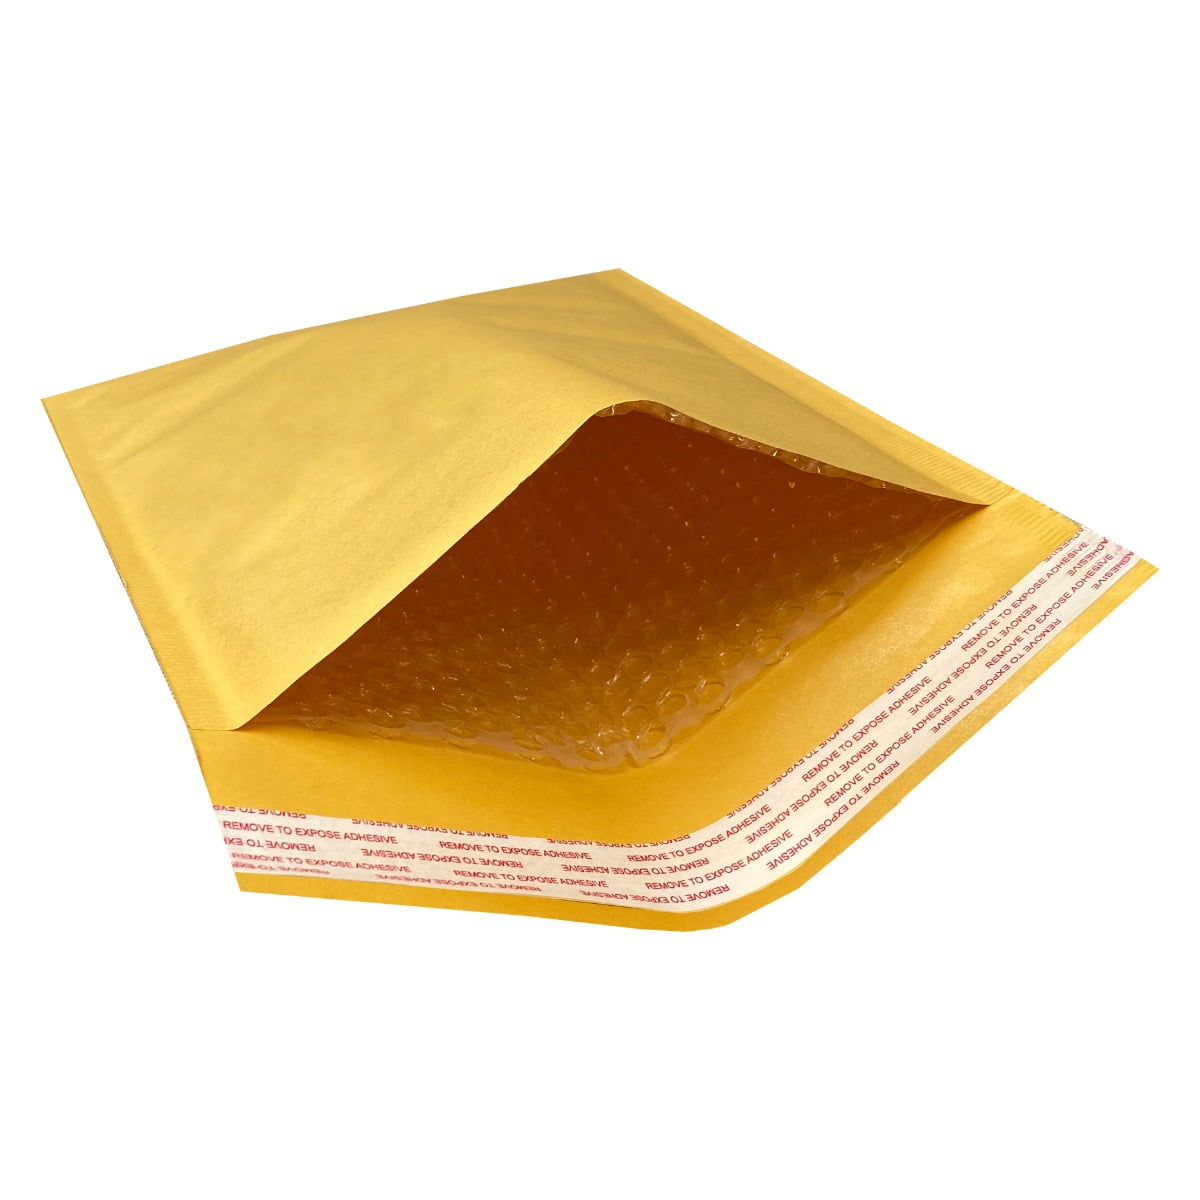 StarBoxes 200 Kraft Bubble Mailers 9.5x14.5" #4 Self-Sealing Padded Envelopes 